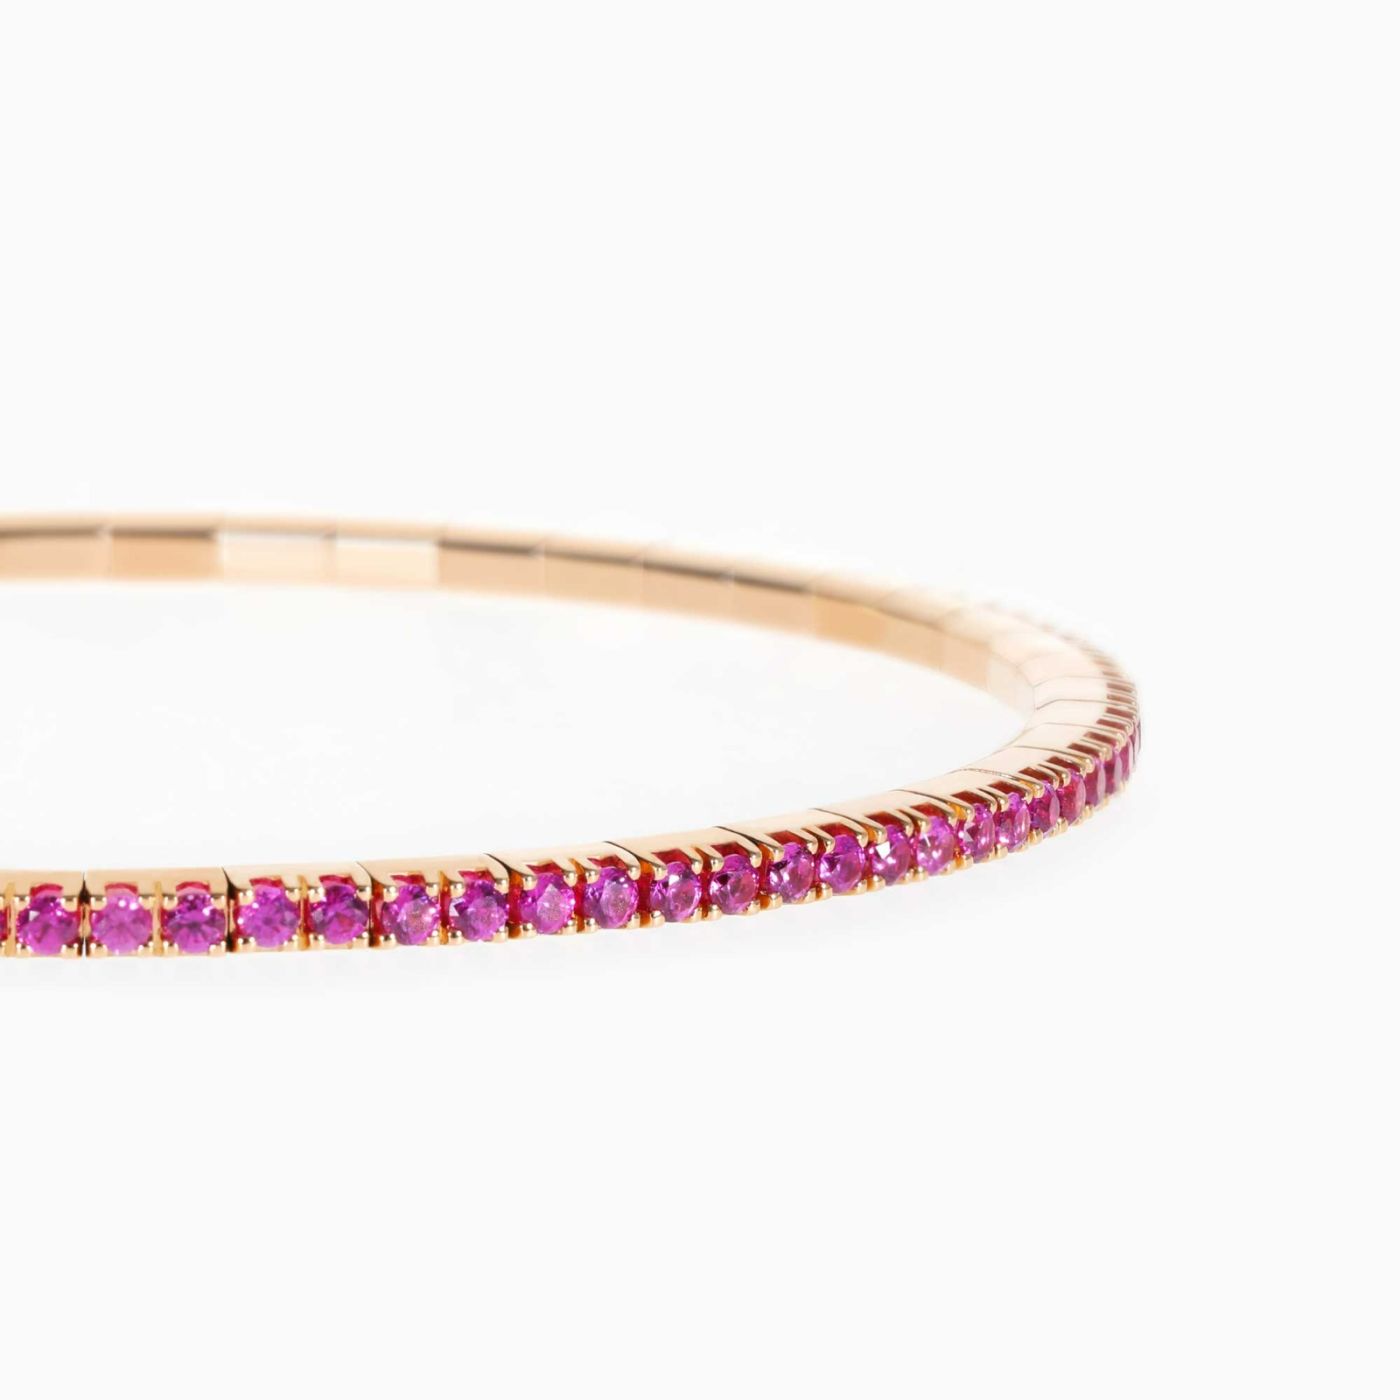 Rose gold riviere bracelet with brilliant-cut rubies